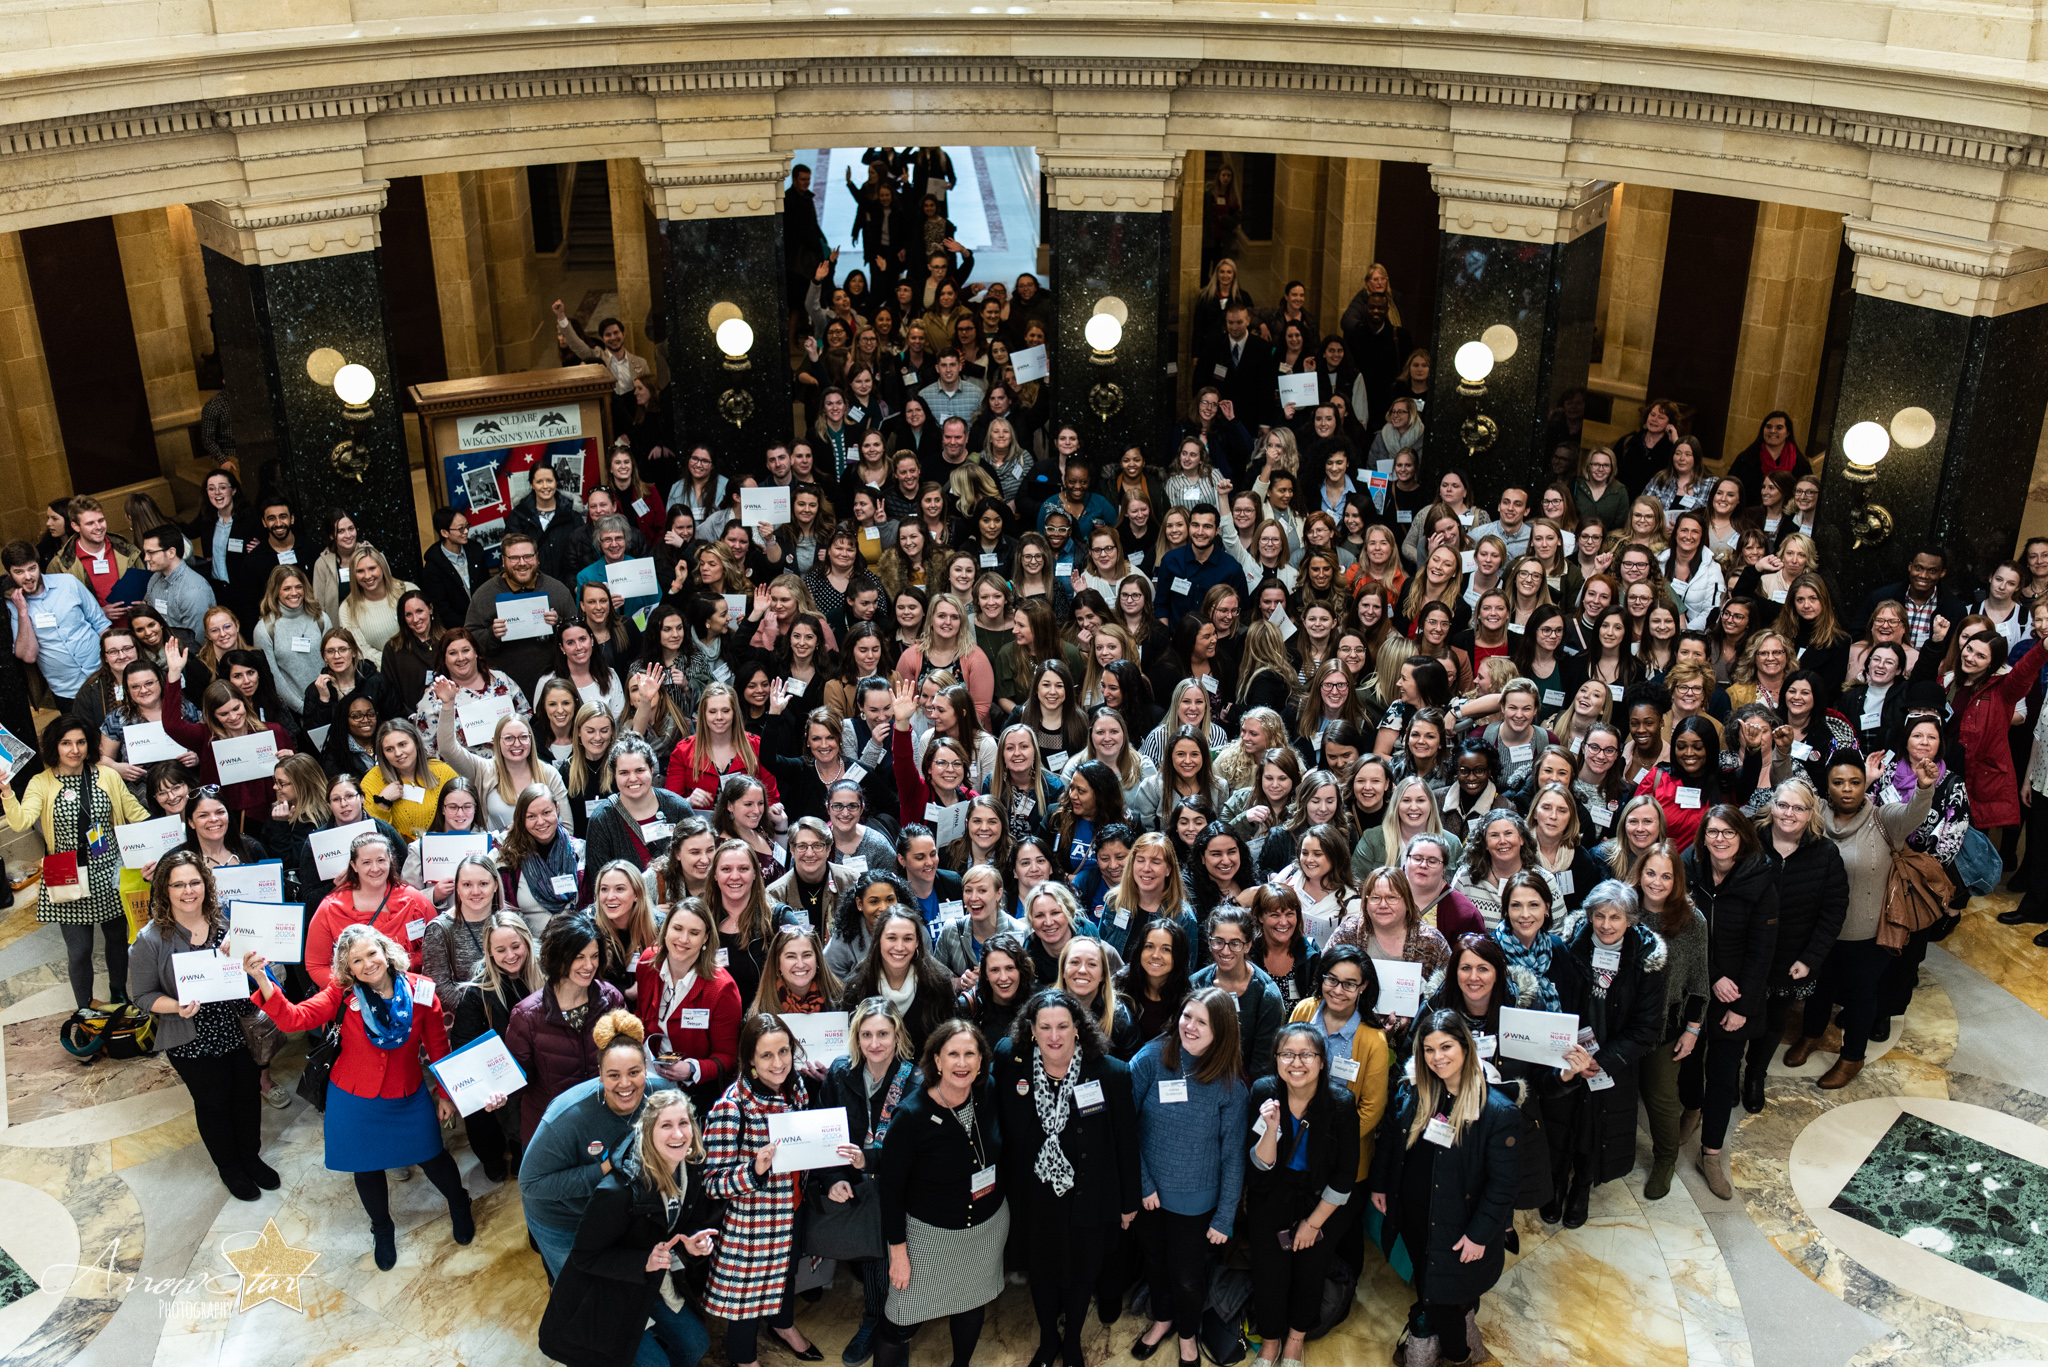 2020 WNA Nurses Day at the Capitol Achieved Demonstration of Nursing’s